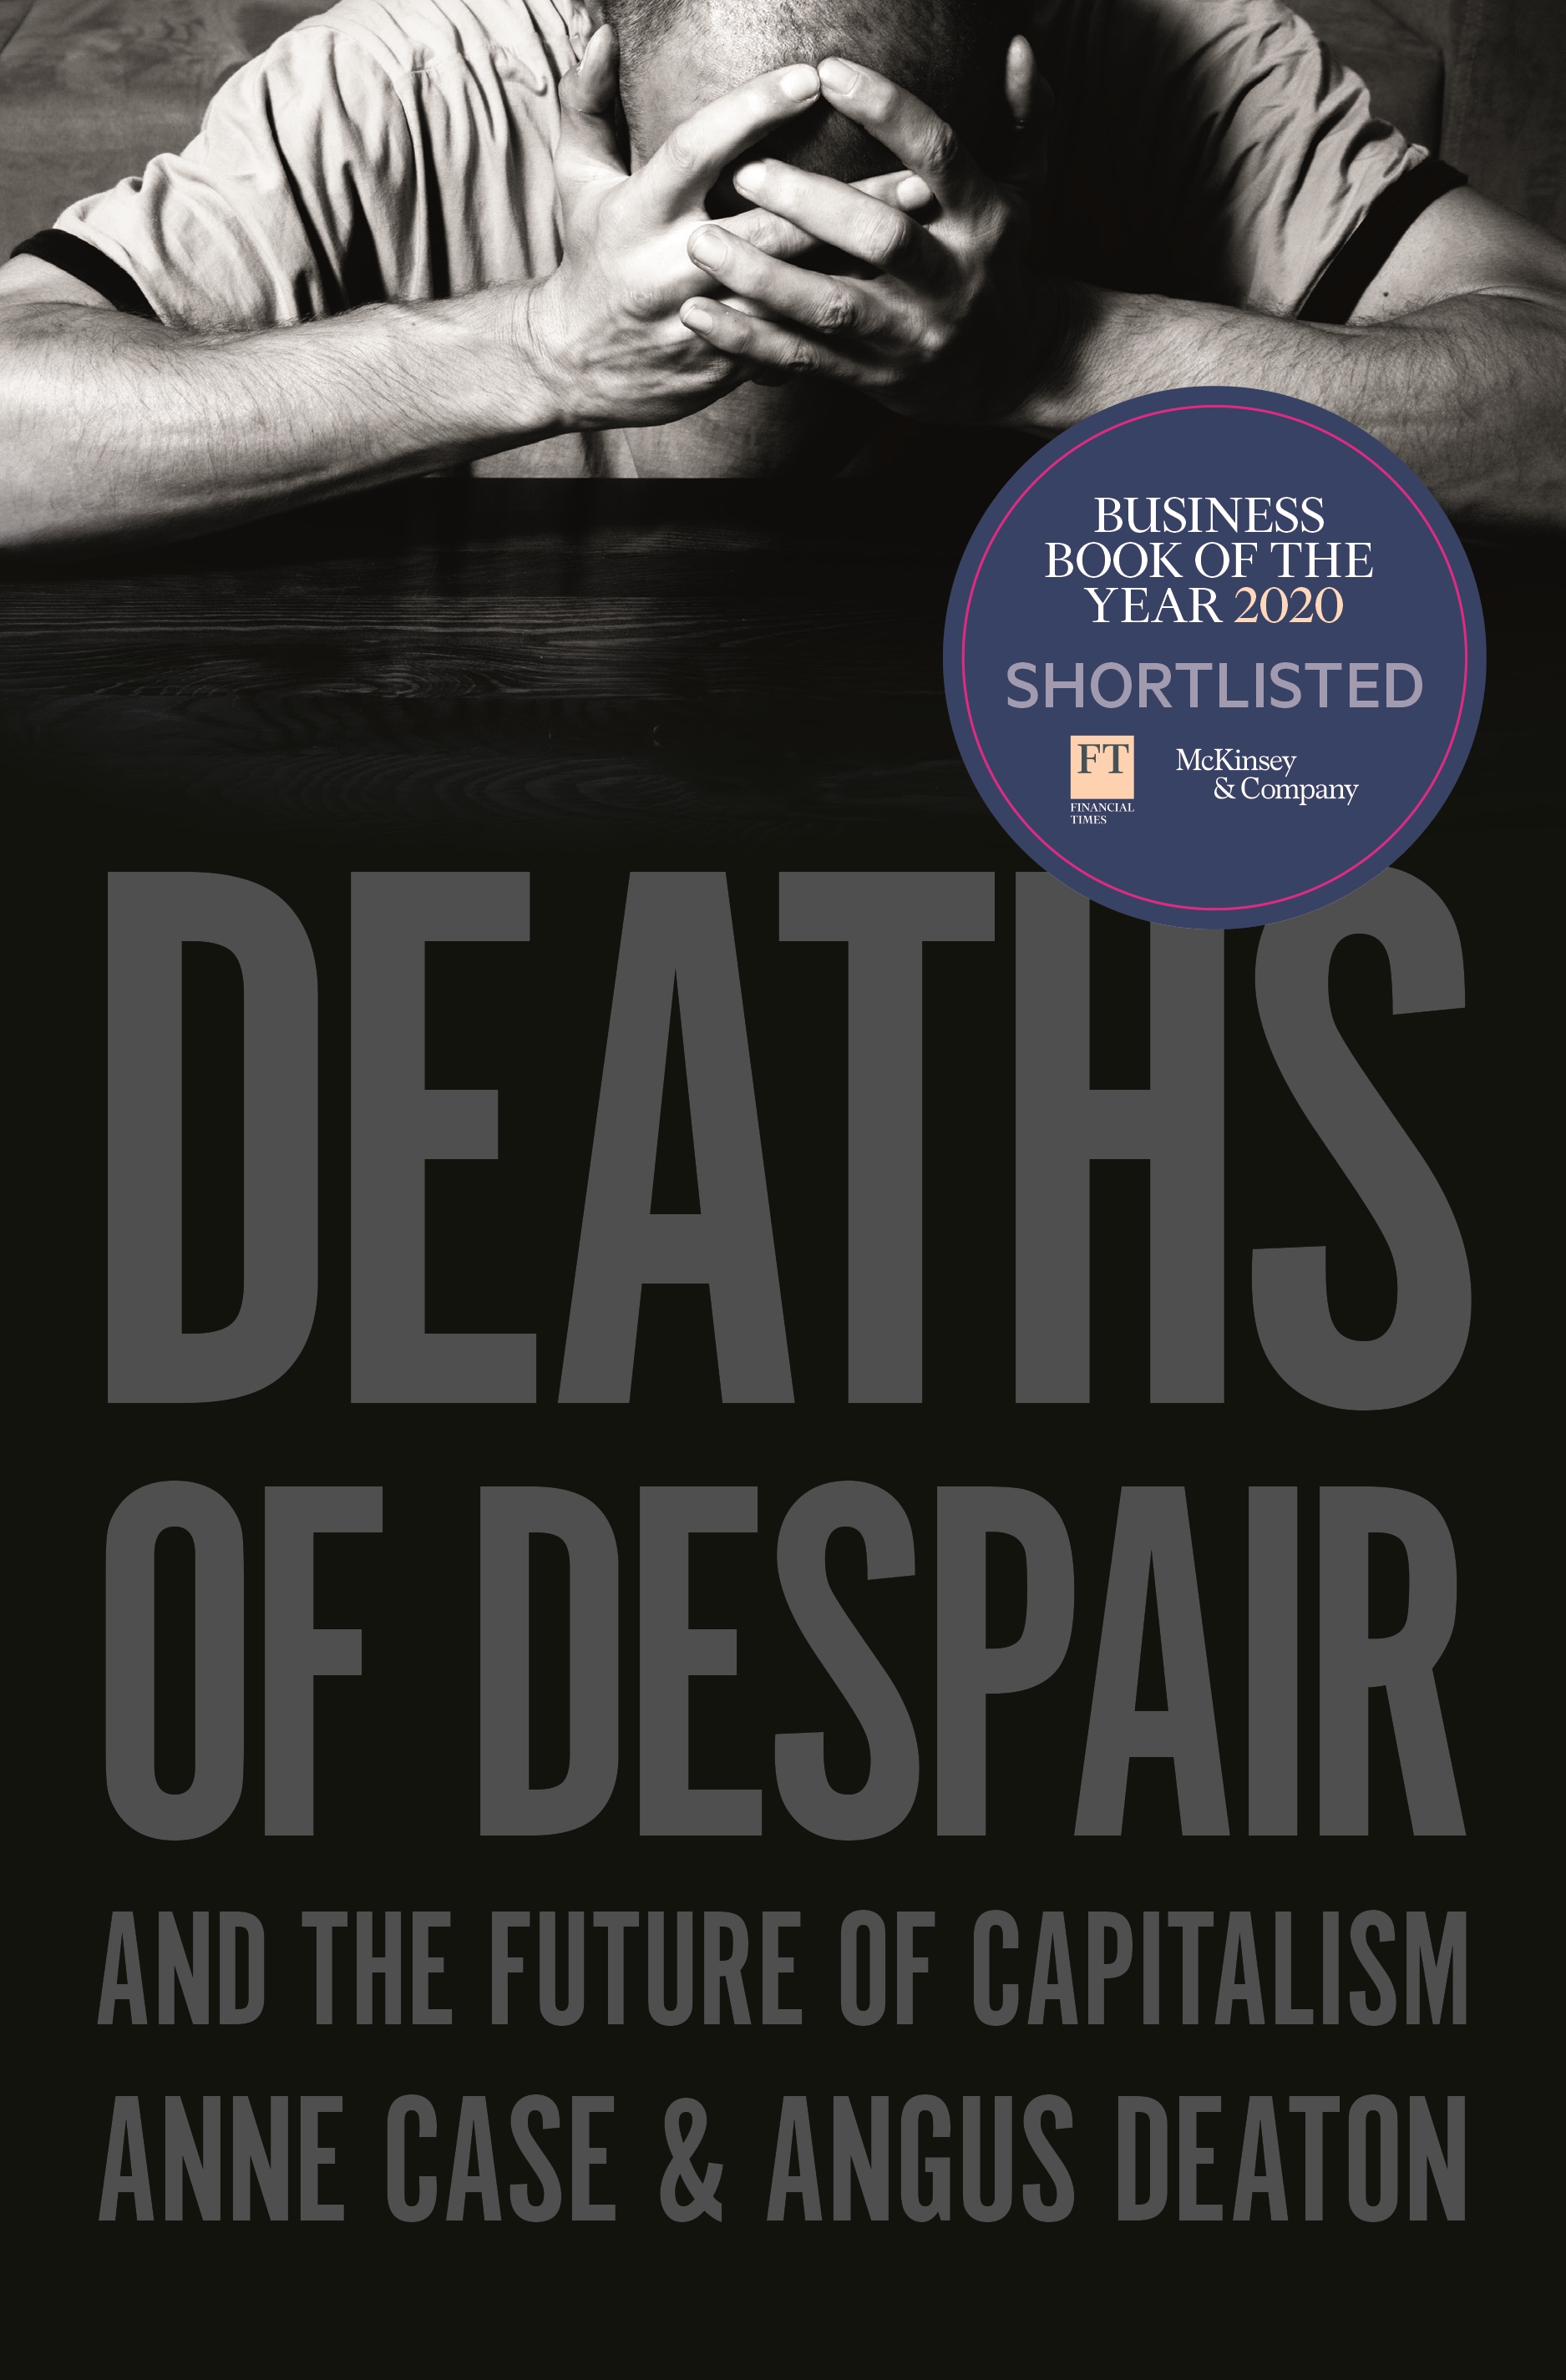 Press　Deaths　University　and　Future　the　of　Capitalism　Princeton　Despair　of